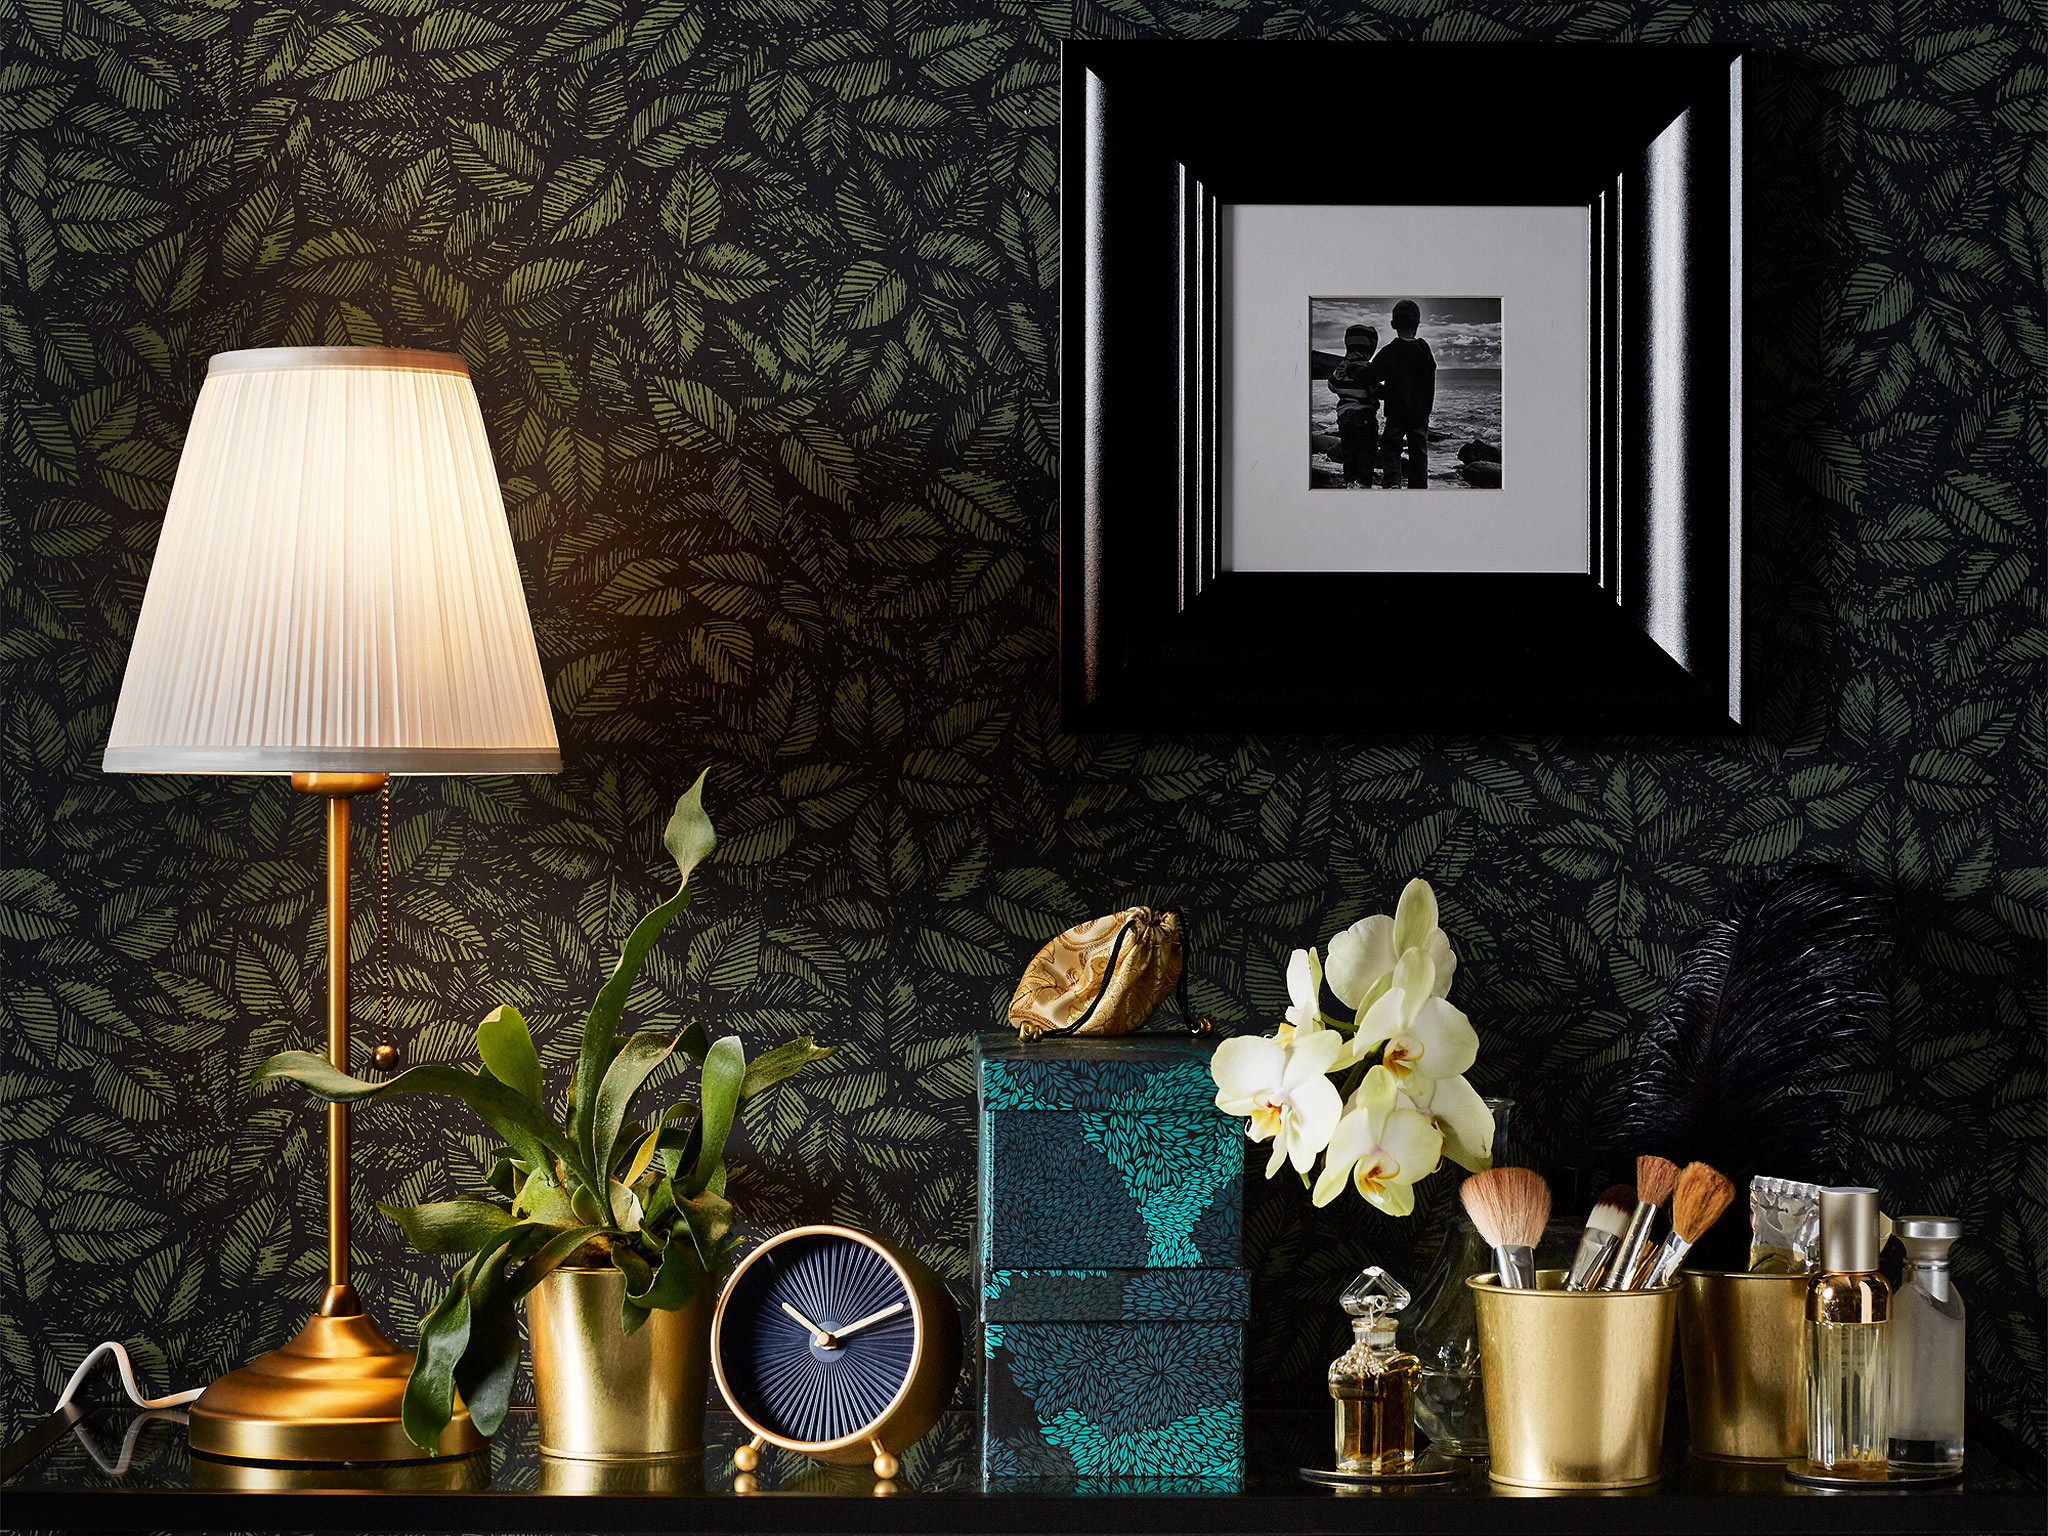 2048x1536 wallpaper provides a backdrop for a gold-coloured lamp stand, plant pot and  clock